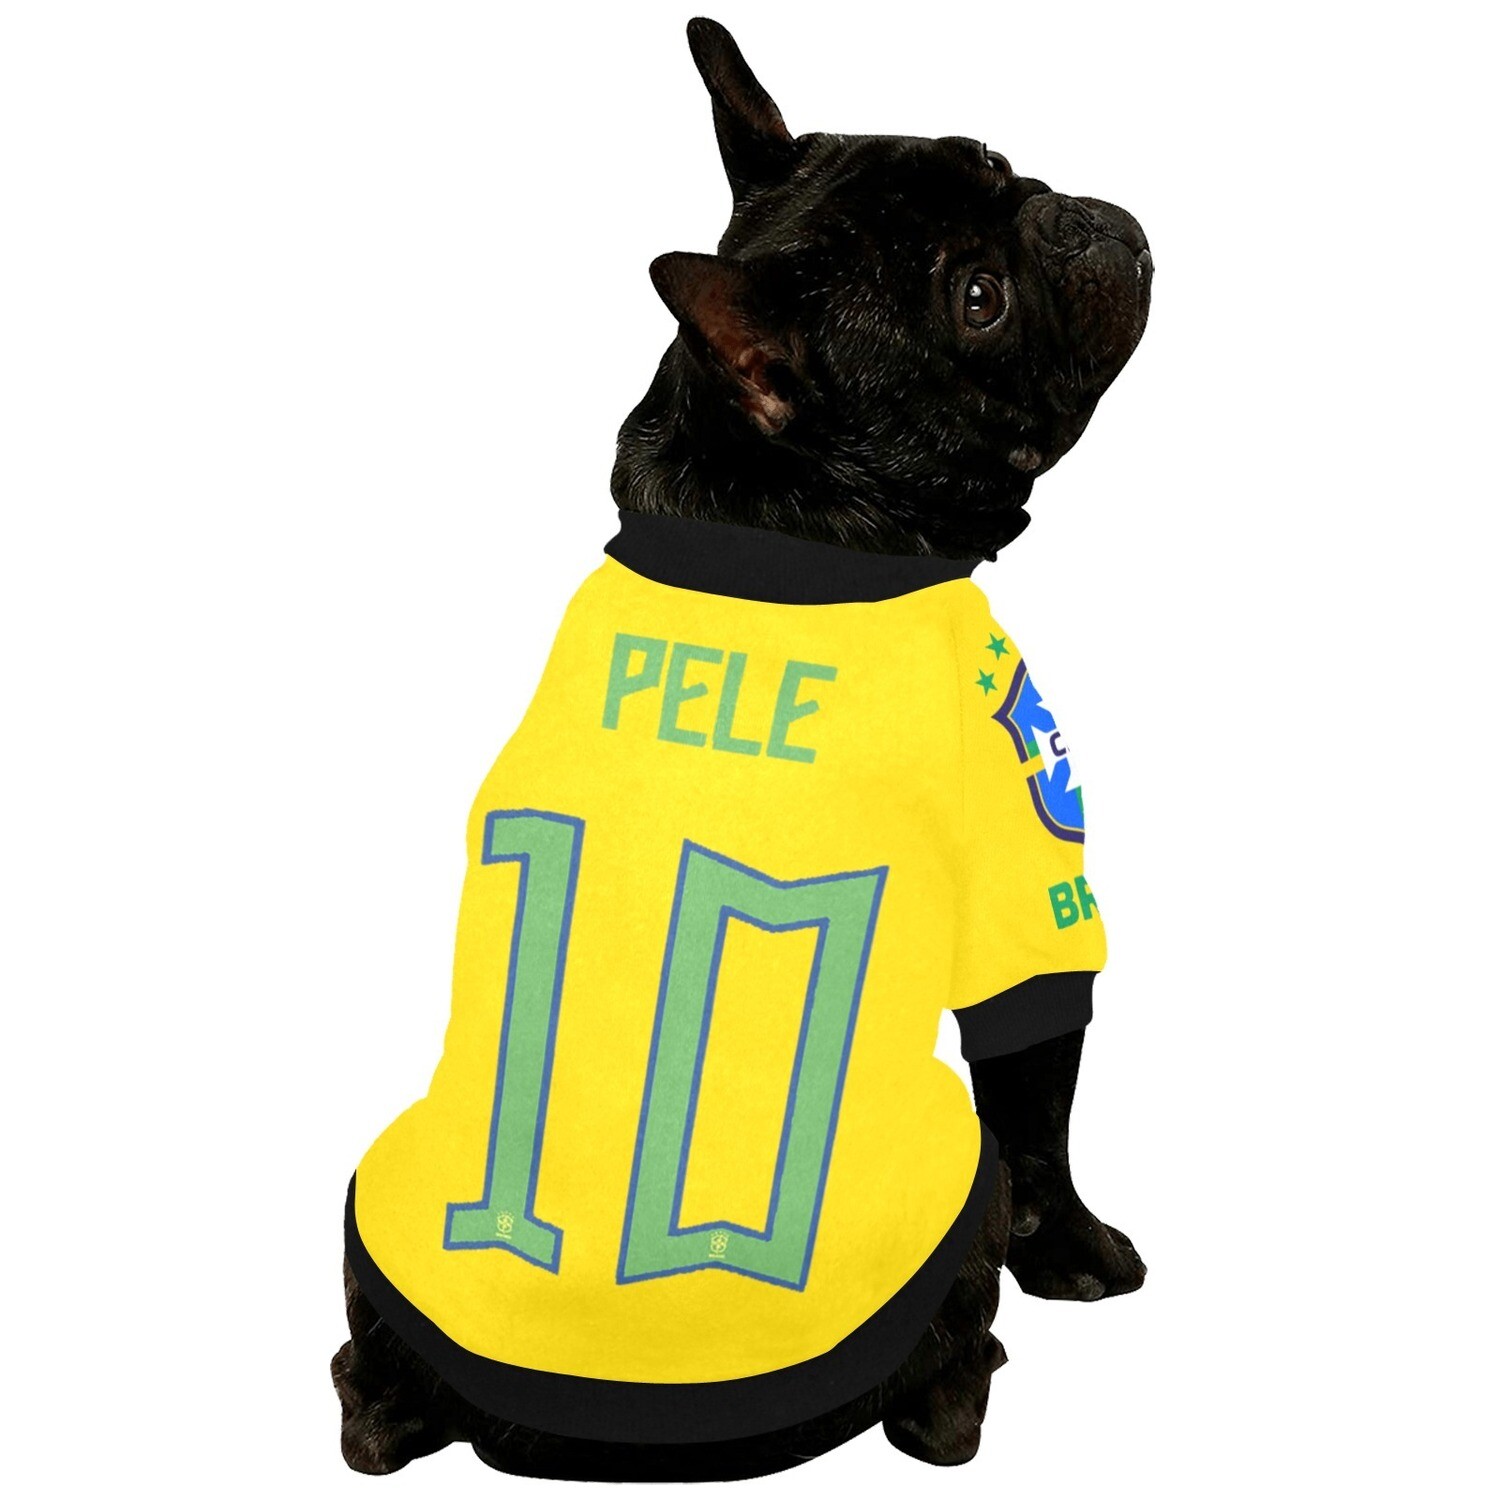 🐕⚽️ 🇧🇷Fuzzy warm buttoned dog sweatshirt Brazil Soccer Team, Pelé, 10, dog sweater, Dog clothes, Dog clothing, Dog apparel, Gift for dogs, world cup